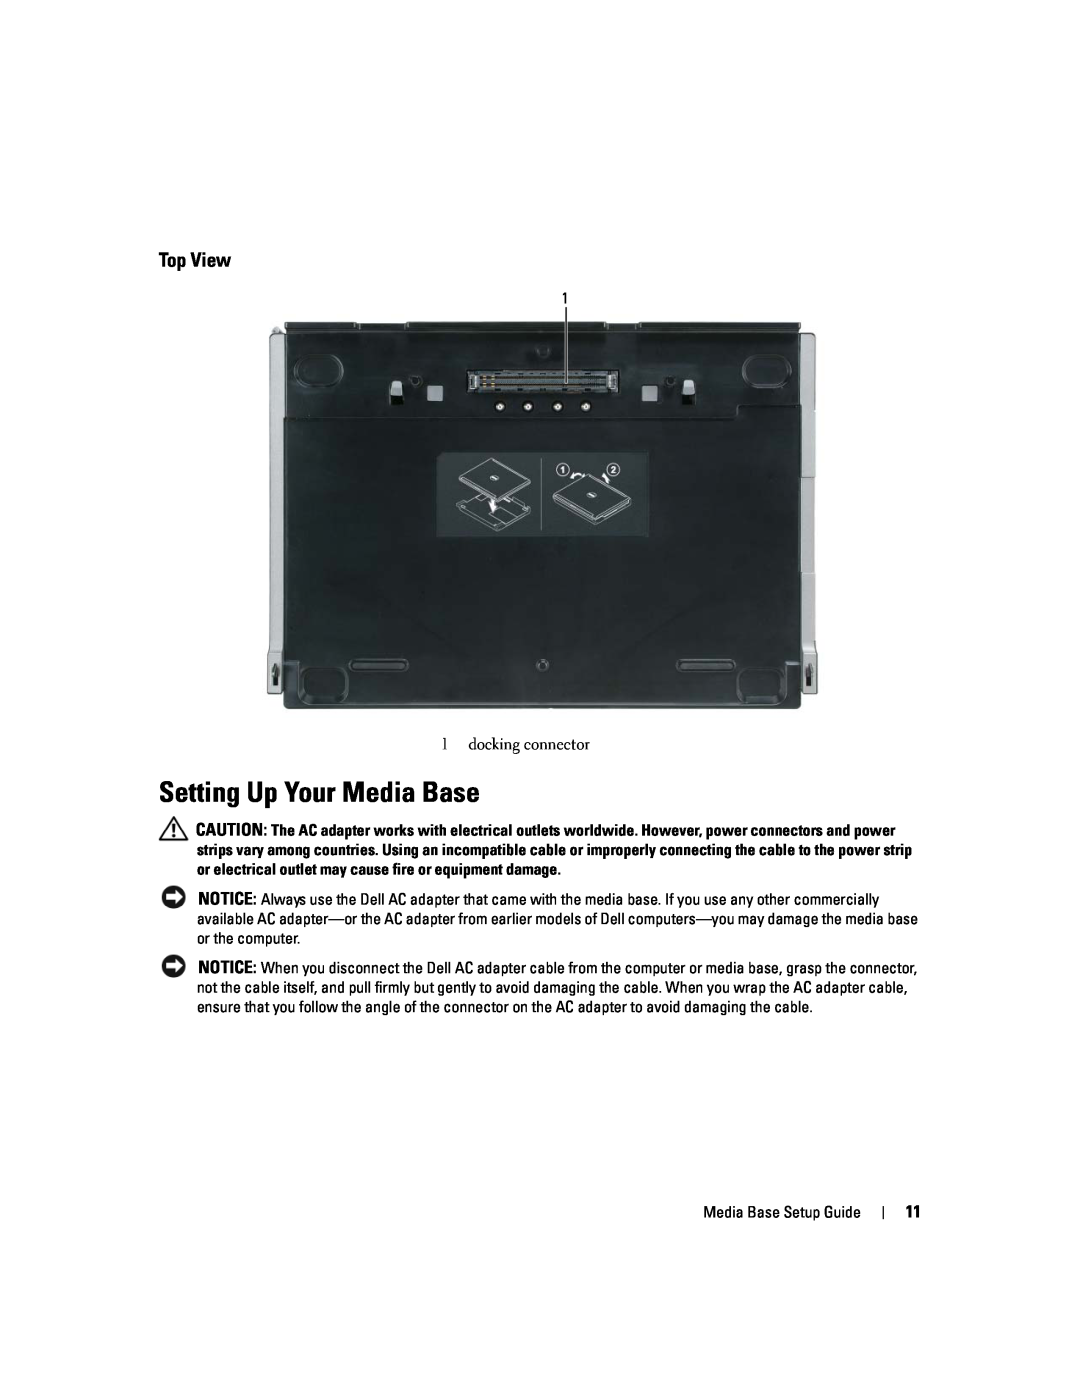 Dell Model PR09S setup guide Setting Up Your Media Base, Top View 